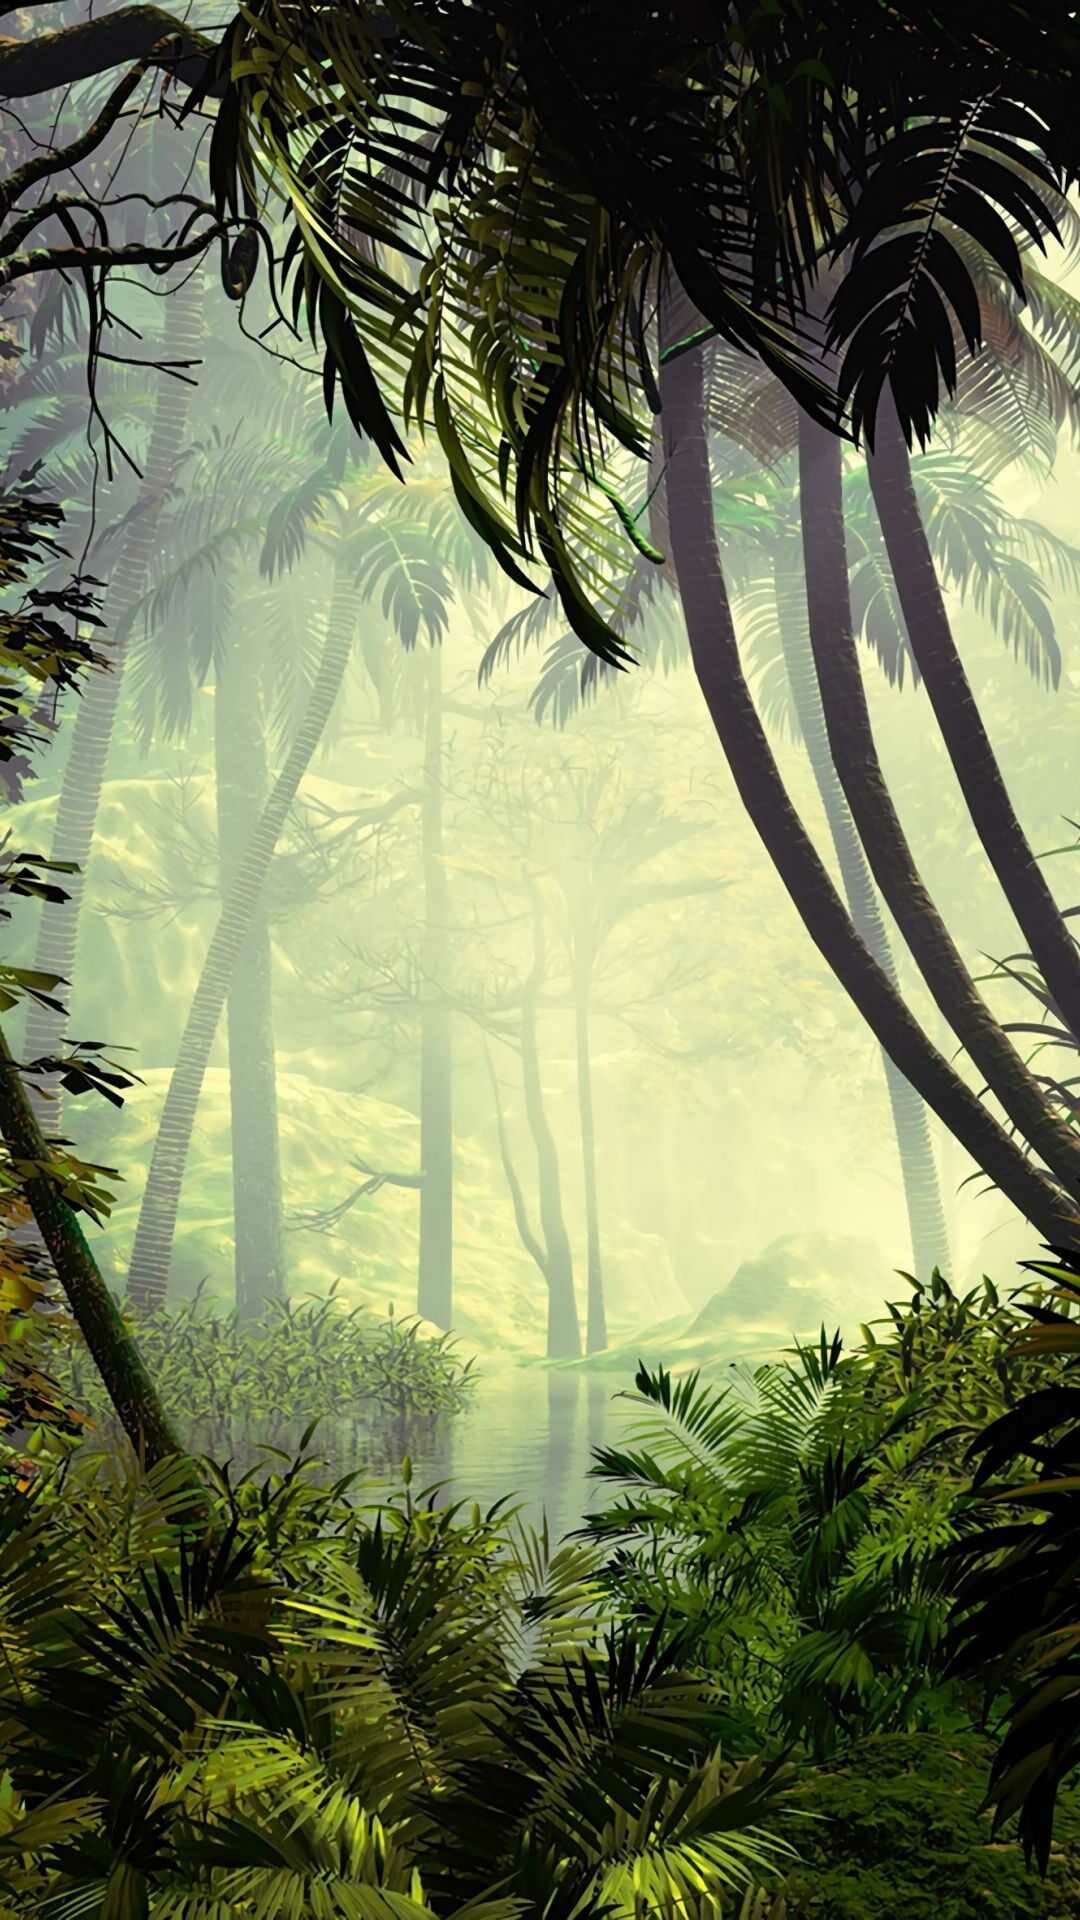 Jungle: An area of land overgrown with dense forest and tangled vegetation. 1080x1920 Full HD Wallpaper.